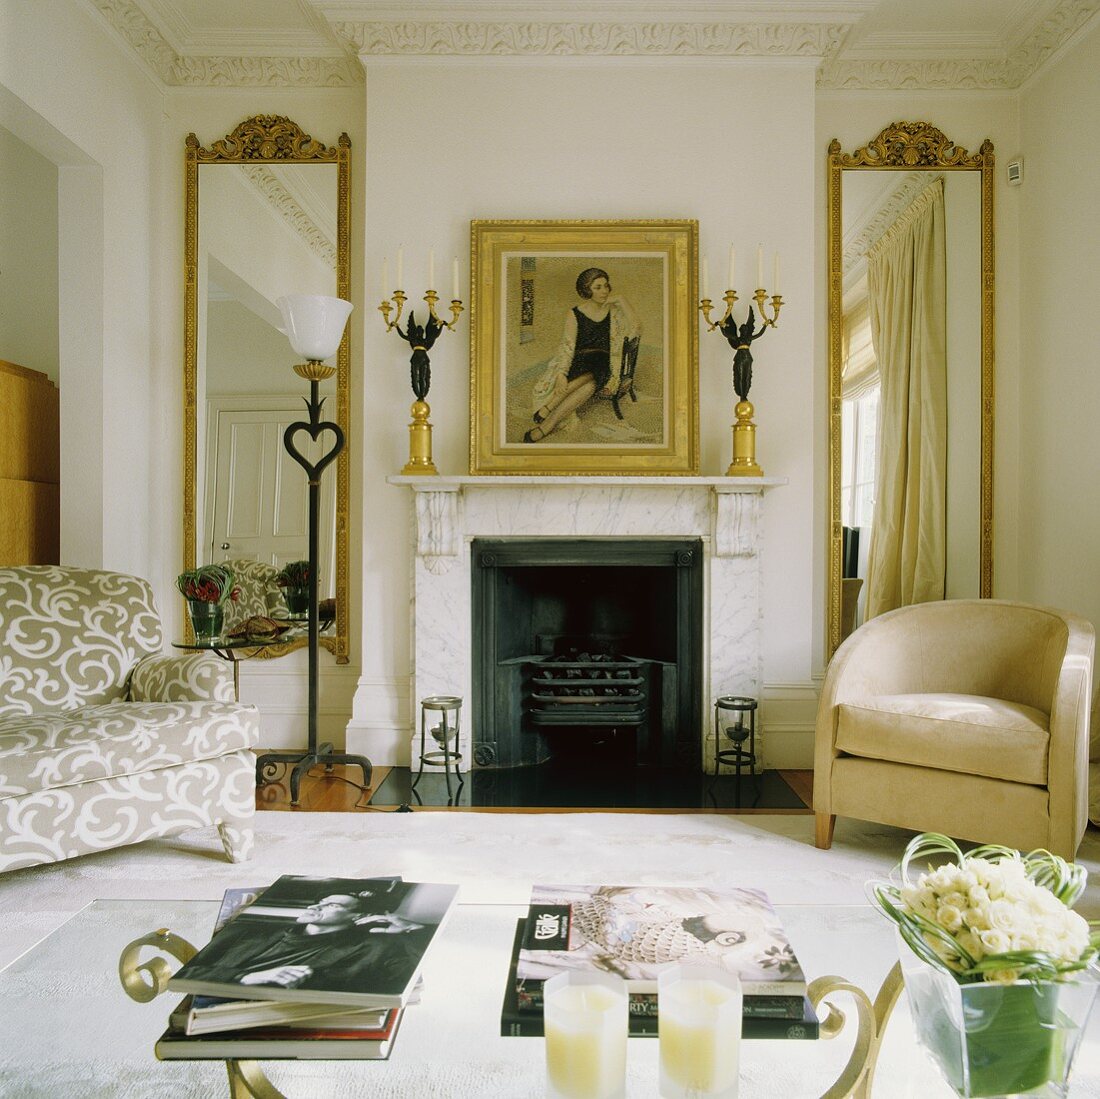 A living room with a fireplace and a comfortable upholstered armchair in front of a floor-to-ceiling mirror with a gold frame